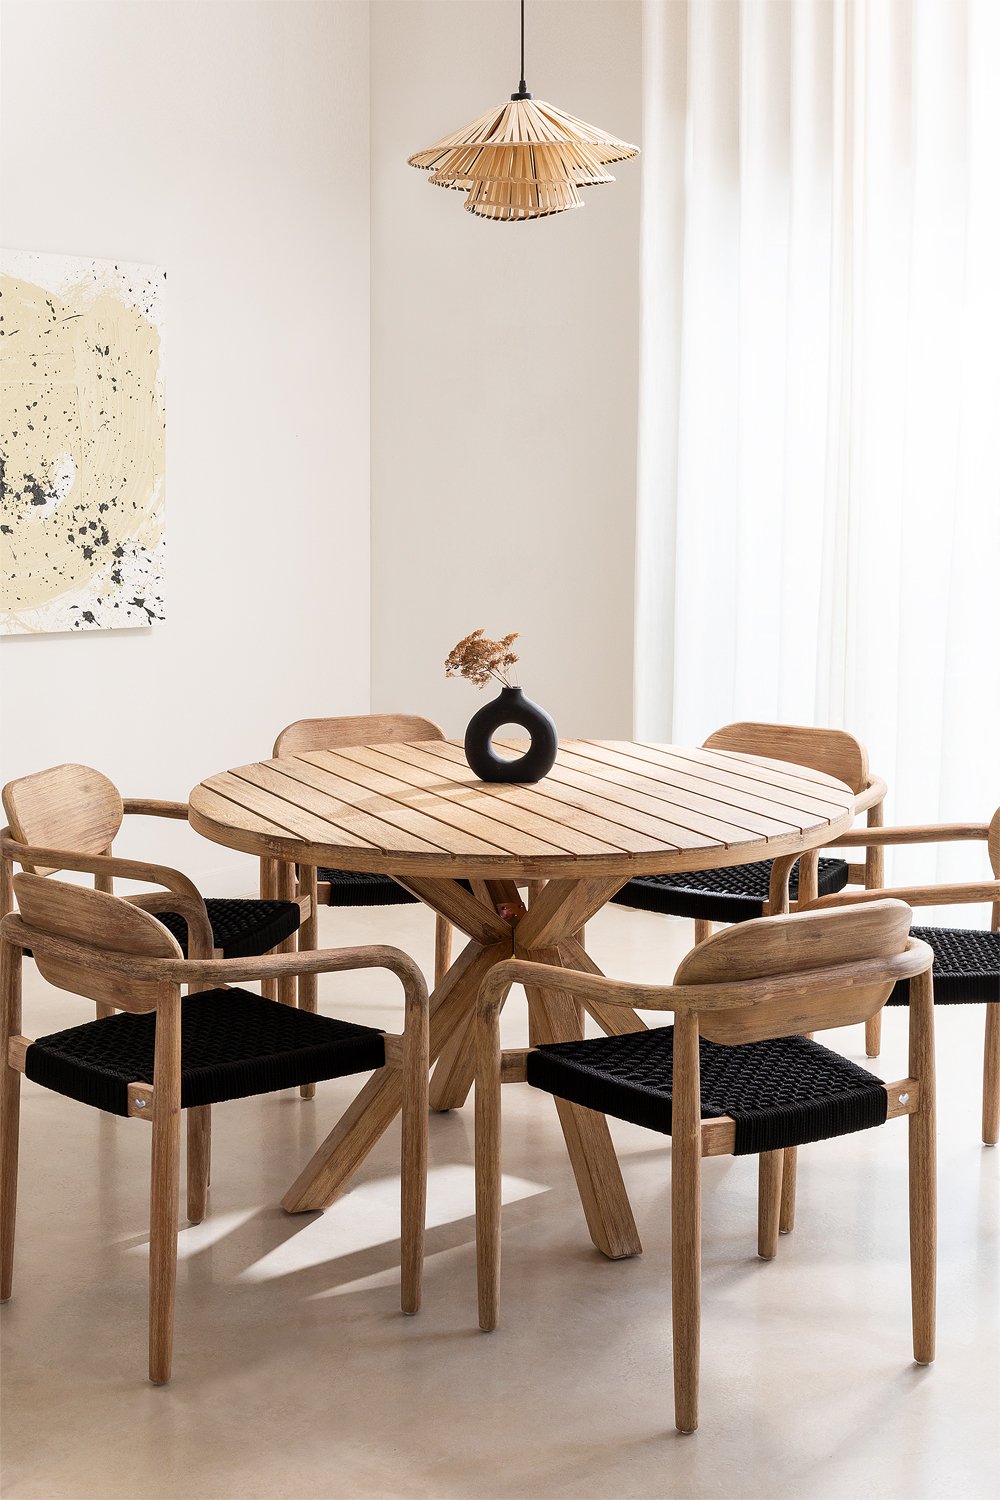 Round Table Set (Ø120 cm) and 6 Dining Chairs with Armrests in Naele Wood, gallery image 1